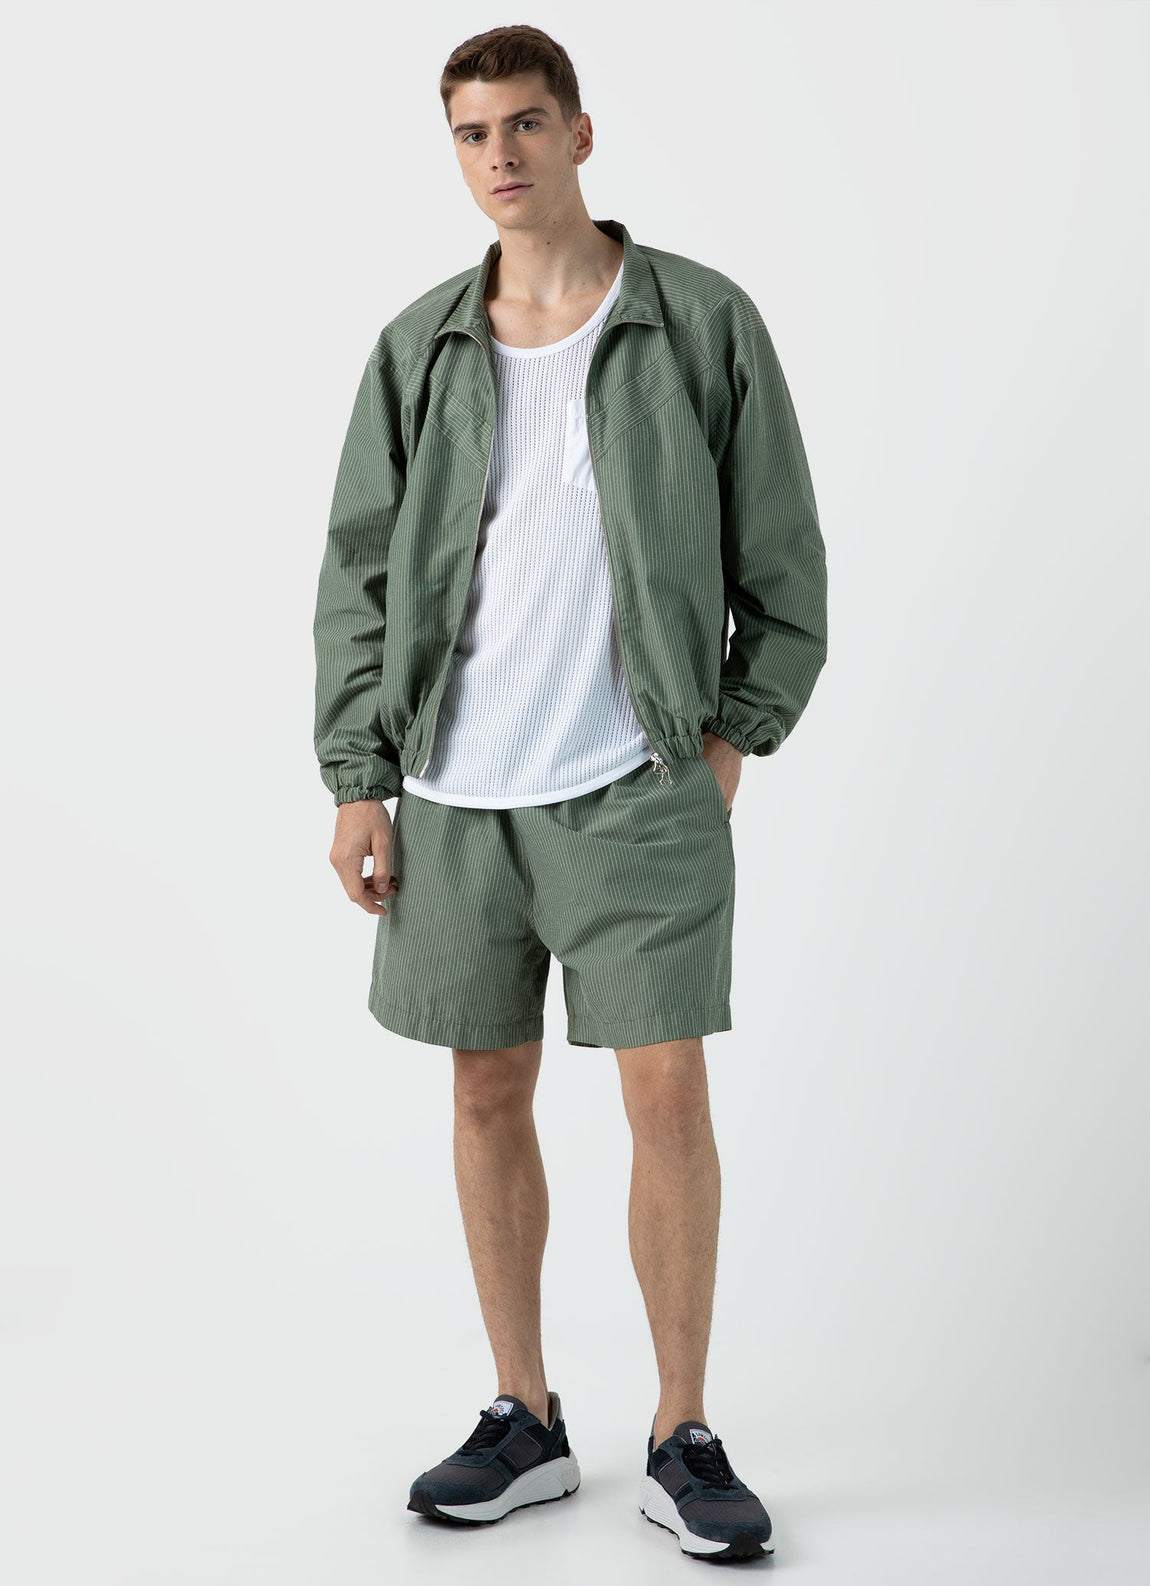 Men's Sunspel x Nigel Cabourn Ripstop Army Jacket in Army Green